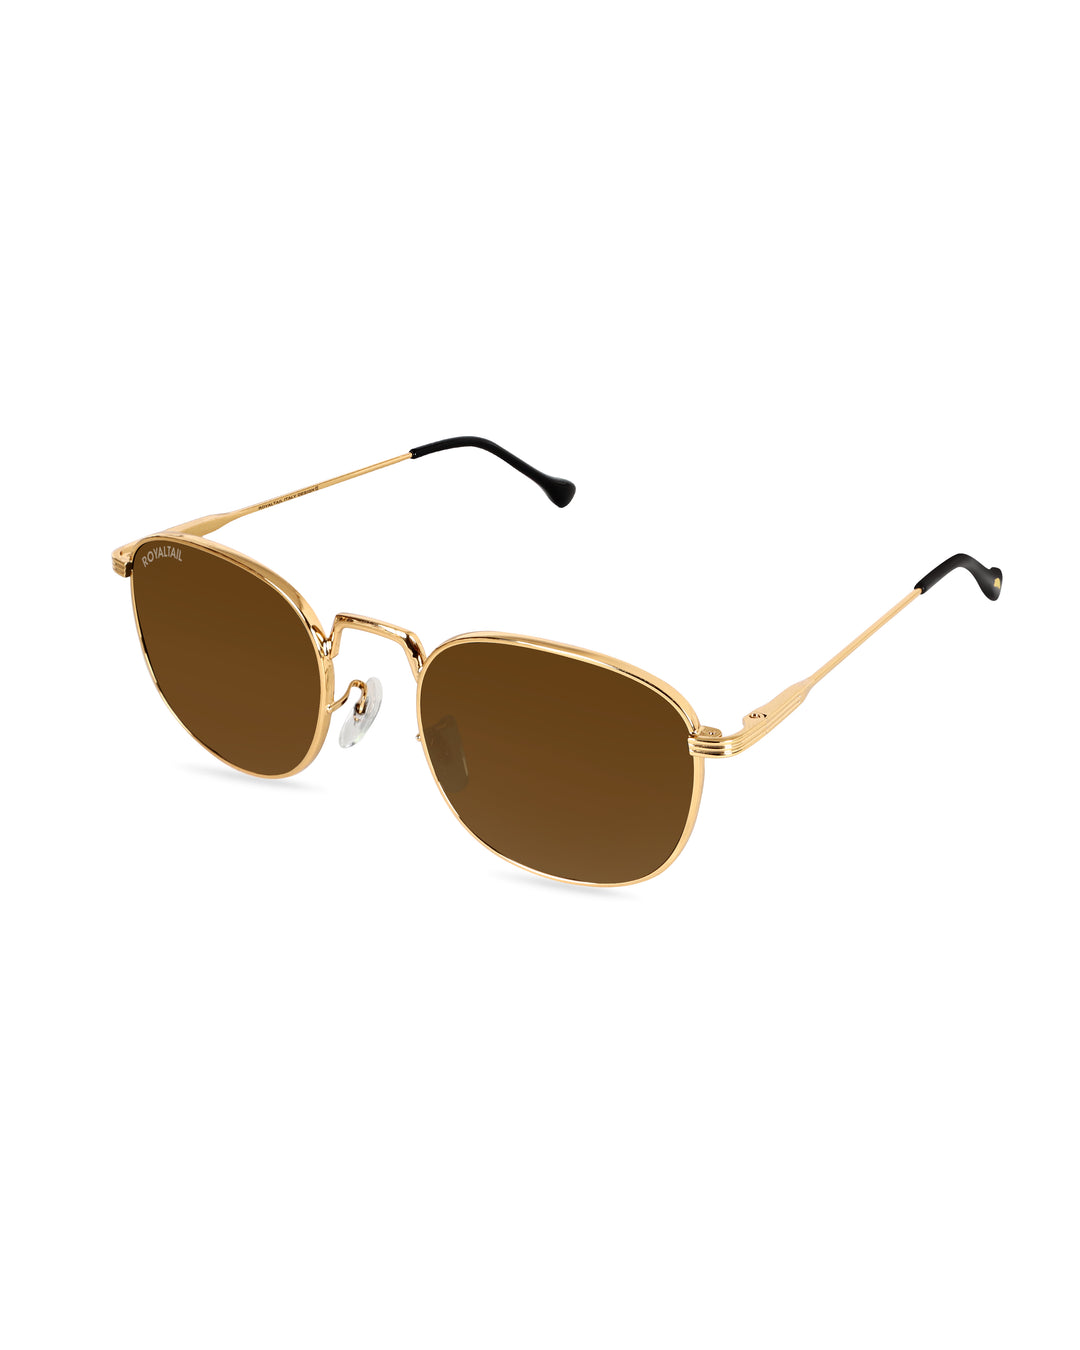 Brown Glass and Gold Frame Round Medford Series Polarized Sunglasses - Royaltail